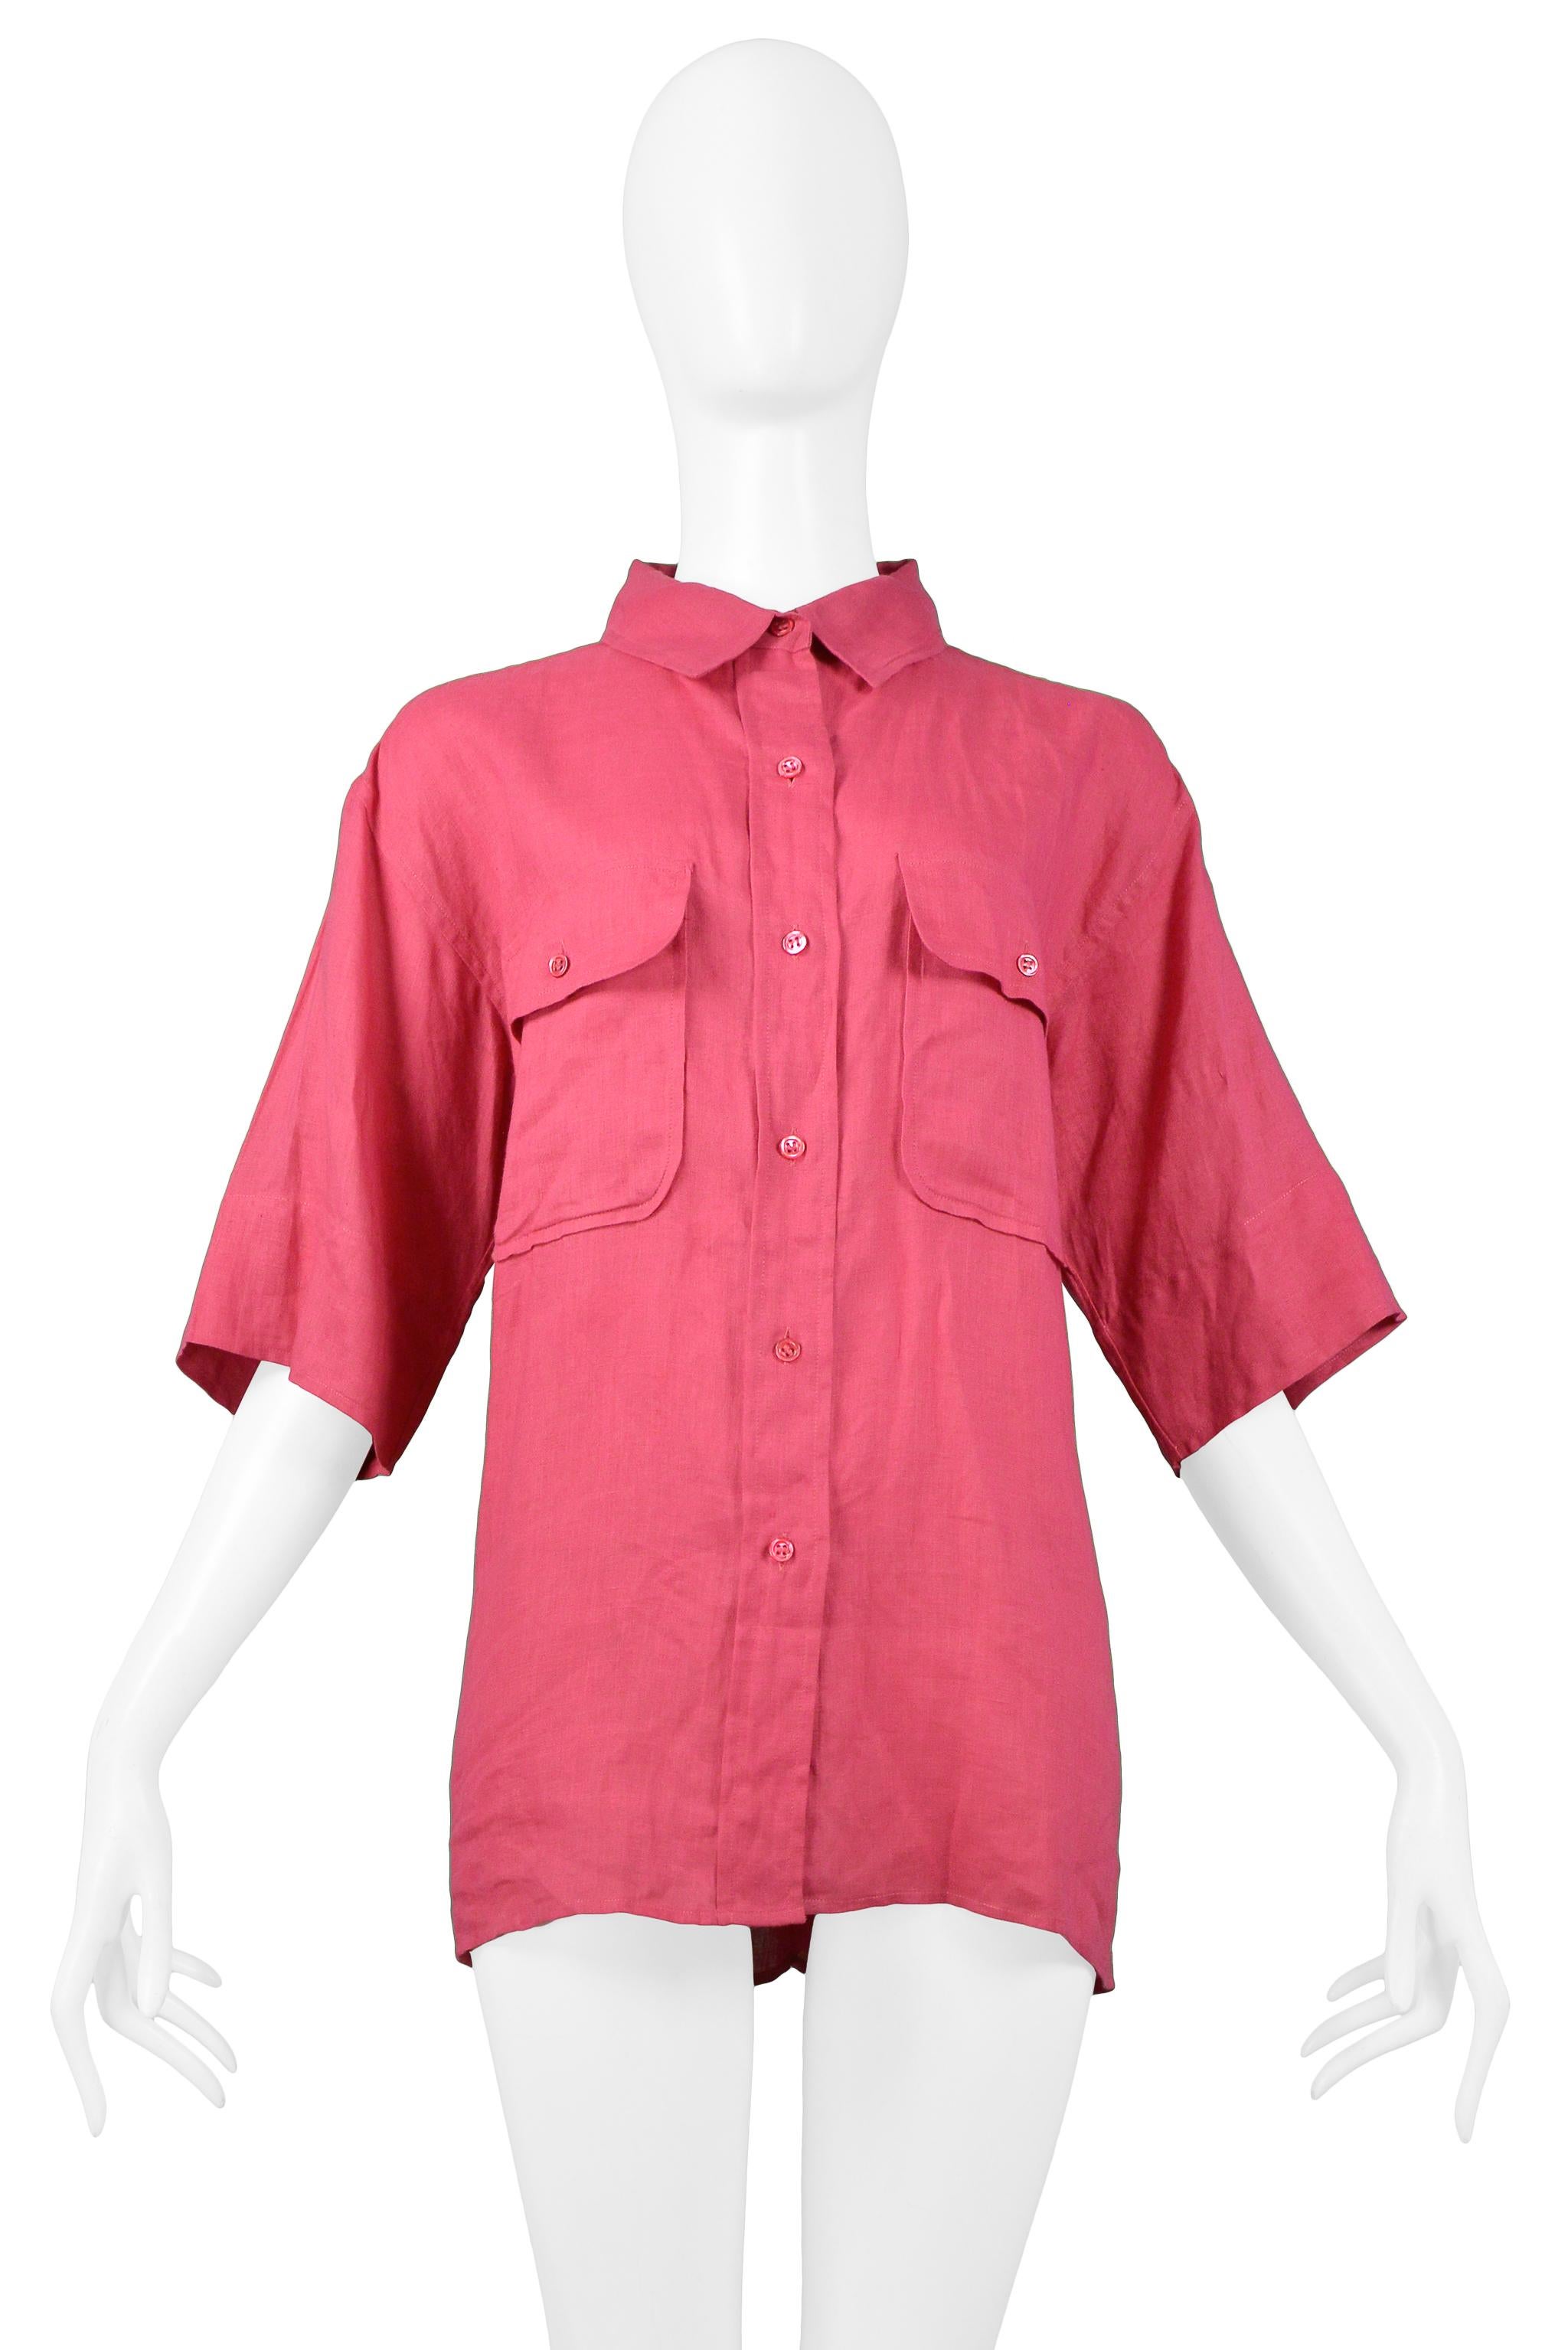 Resurrection Vintage is excited to offer a vintage pink linen Yves Saint Laurent safari shirt featuring a folding collar, button front, two large button pockets, and easy sleeves.

Yves Saint Laurent
Size: 40
Linen
Excellent Vintage